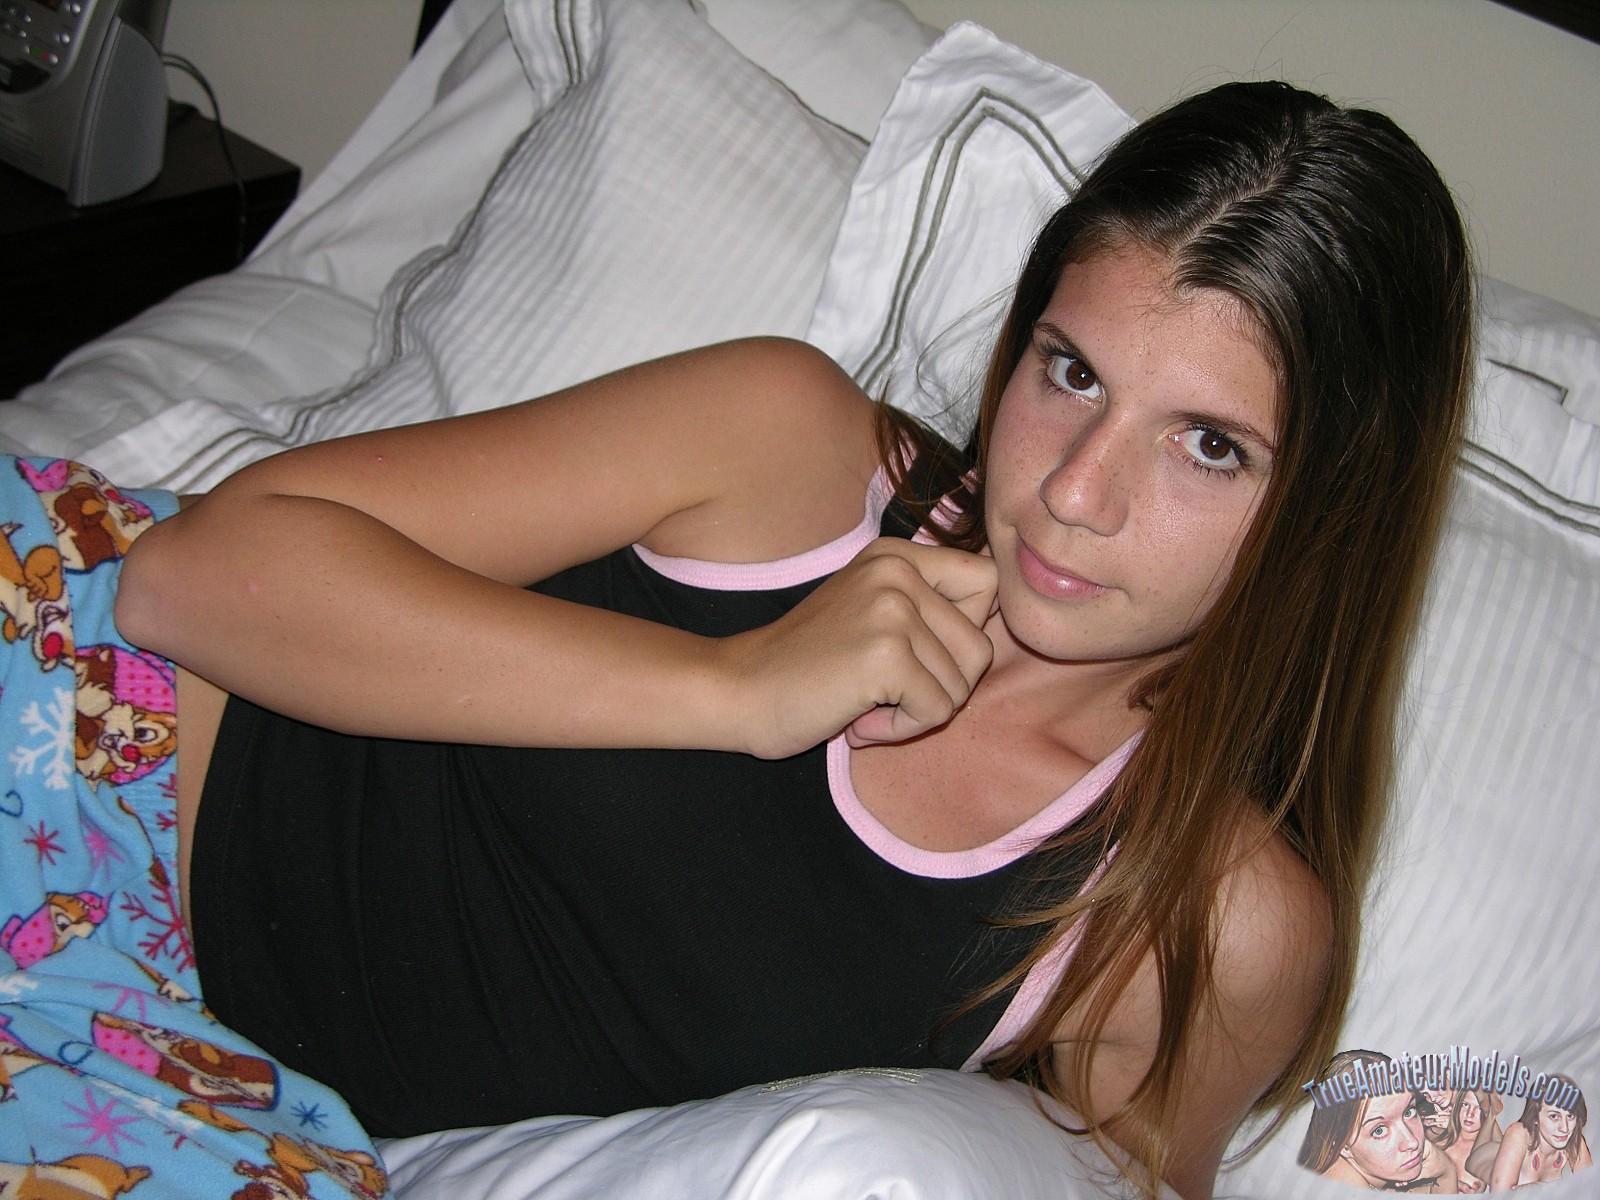 Amature Pajama Porn - Amateur Freckled Face Teen Strips Out Of Her Pajamas